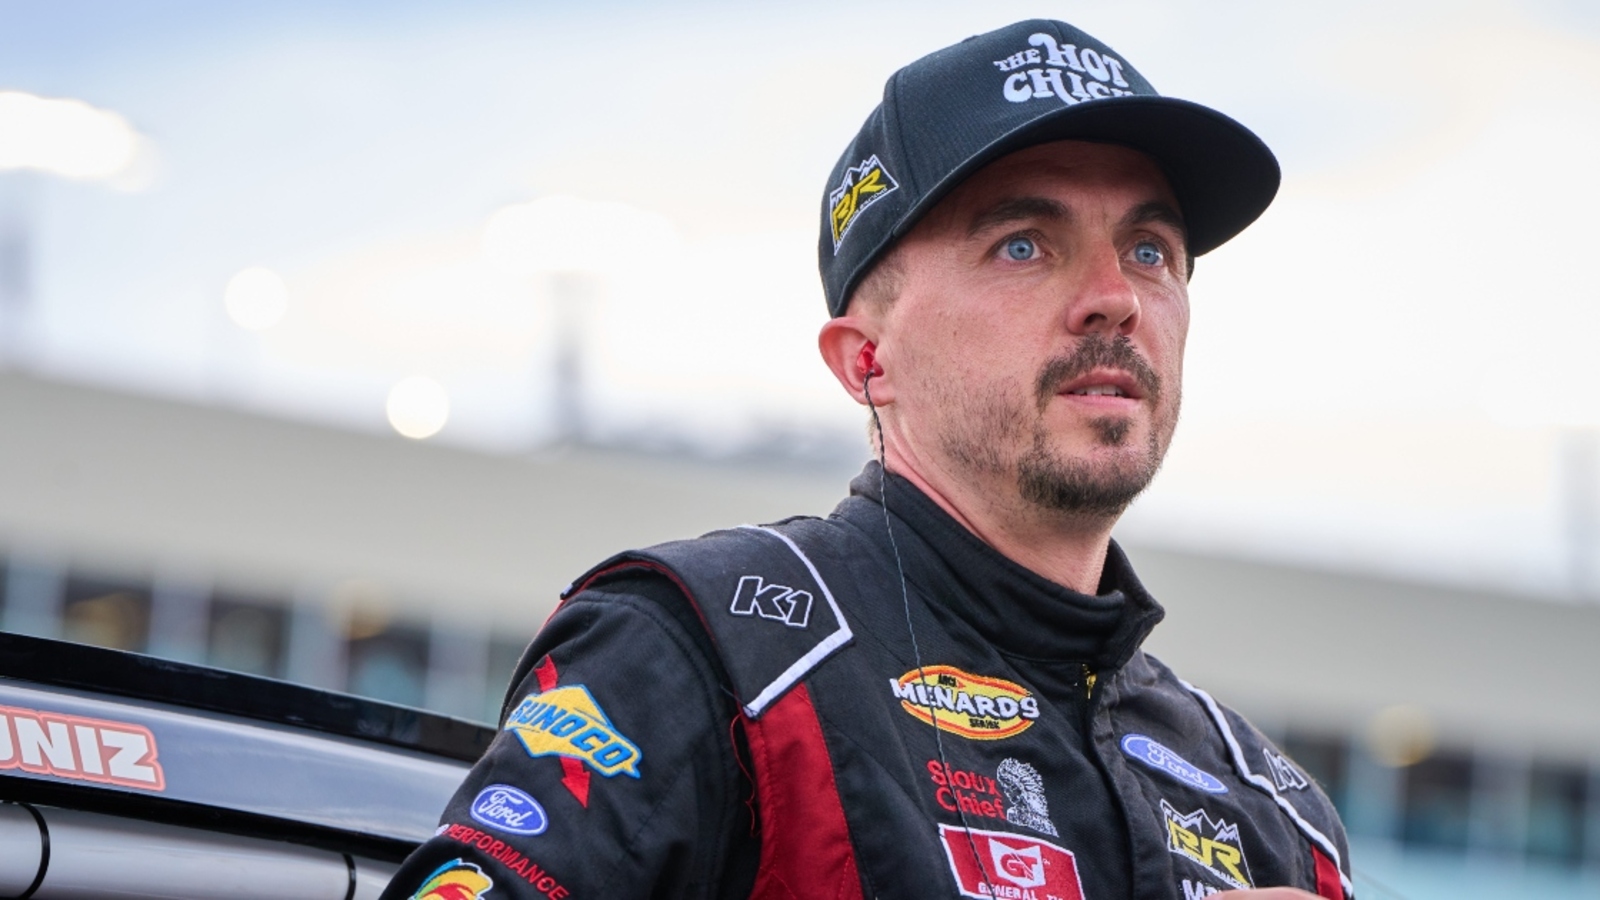 Frankie Muniz teases Daytona plans after working on simulator with Cole Custer